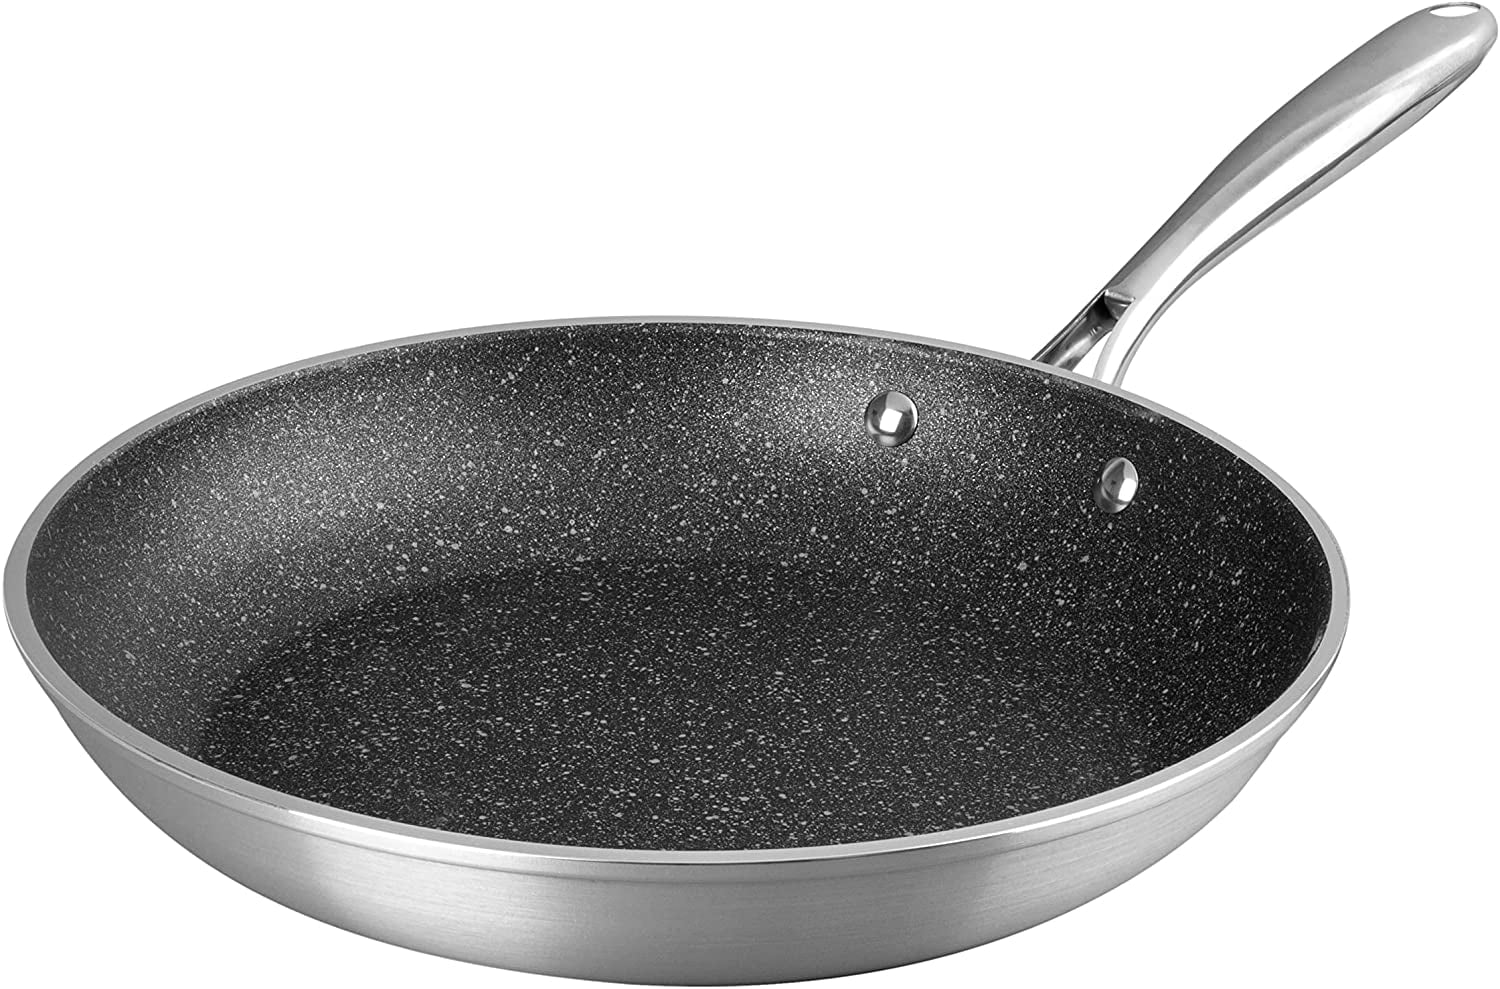 MICHELANGELO Frying Pan Set with Lid, 8 & 10 Granite Frying Pan Set with  100% APEO & PFOA-Free Stone Non Stick Coating, Granite Skillet Set with